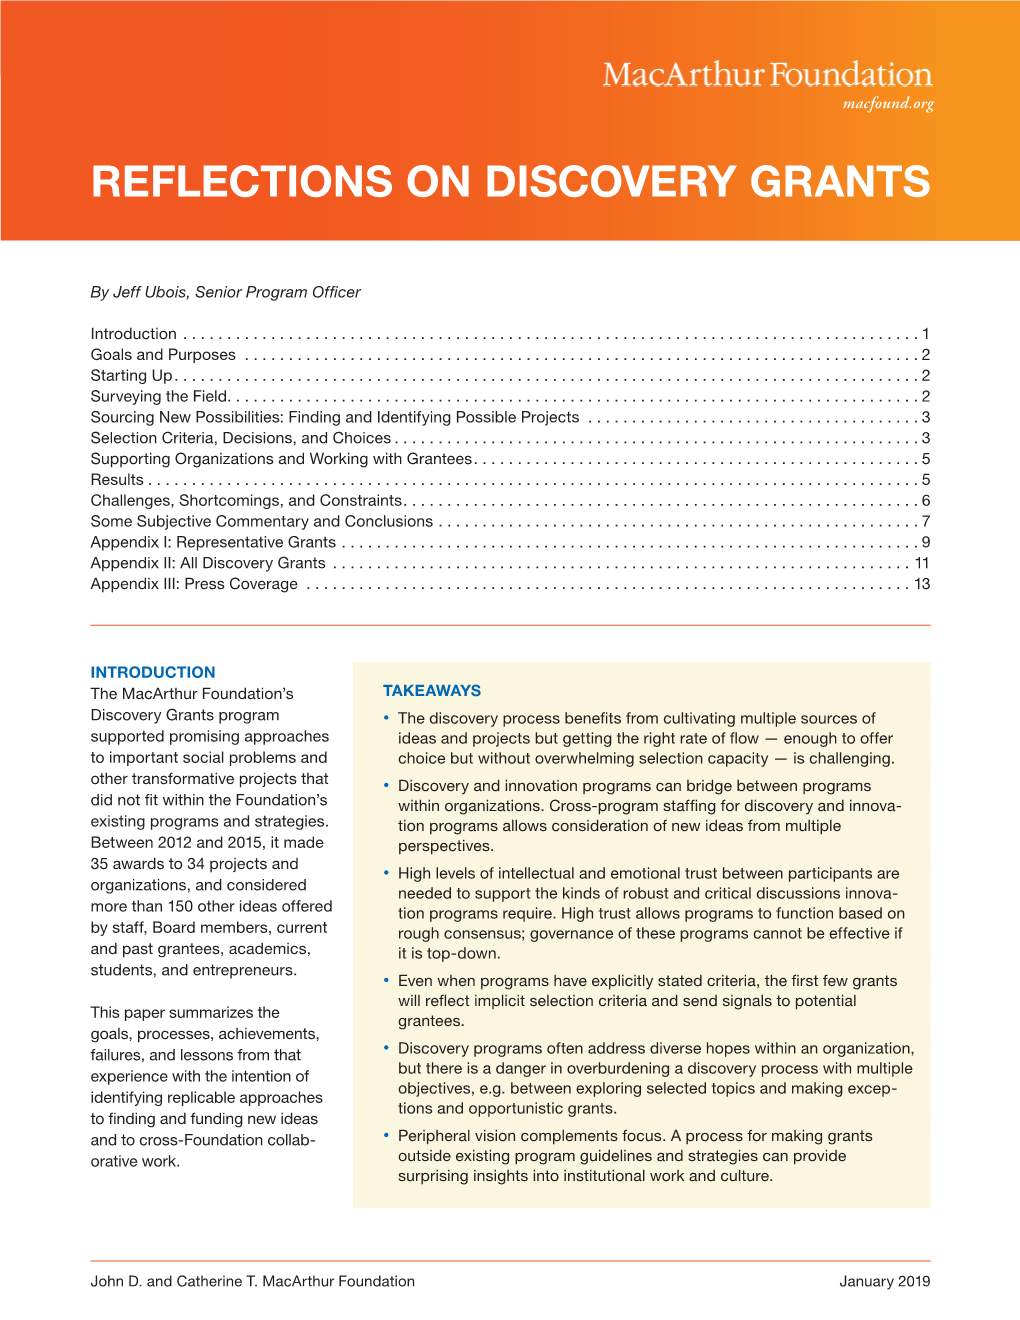 Reflections on Discovery Grants